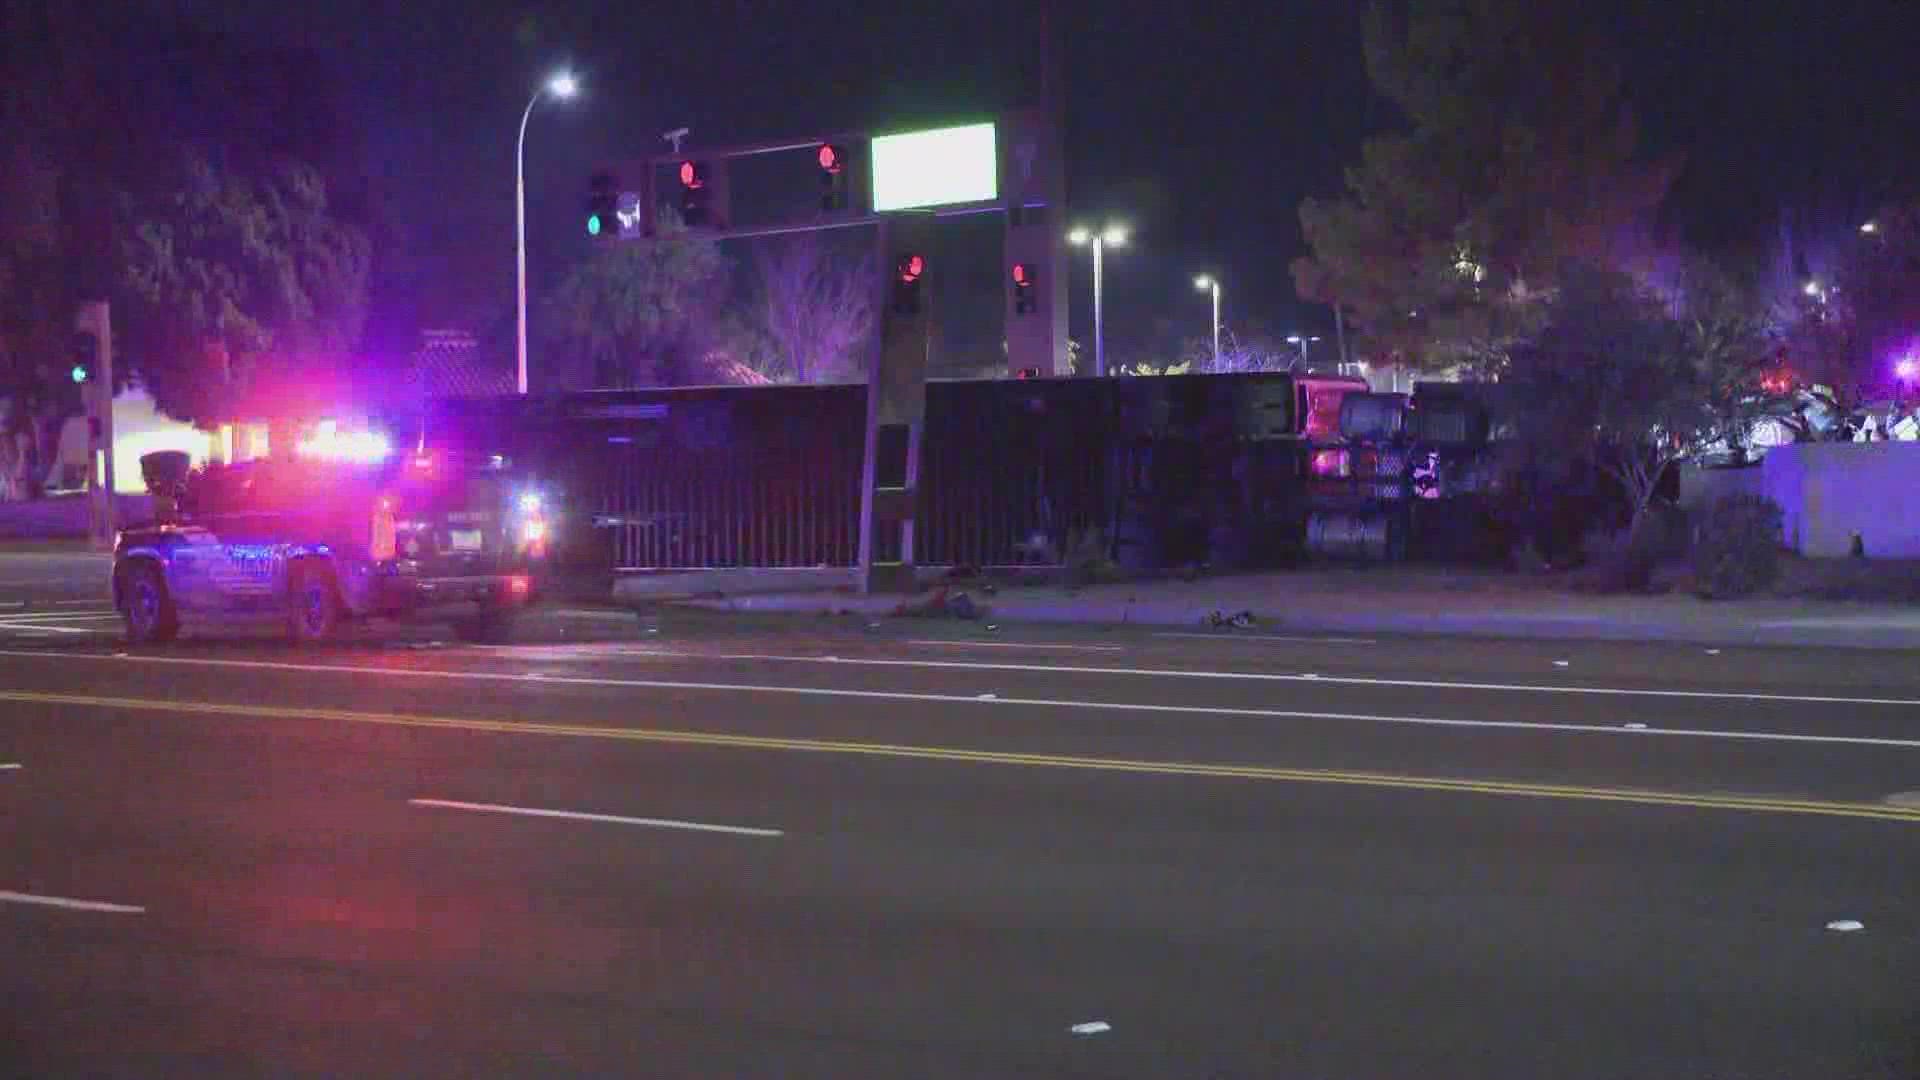 An MCSO deputy has has non-life threatening injuries after a crash involving a semi near Baseline and Rural roads in Tempe.